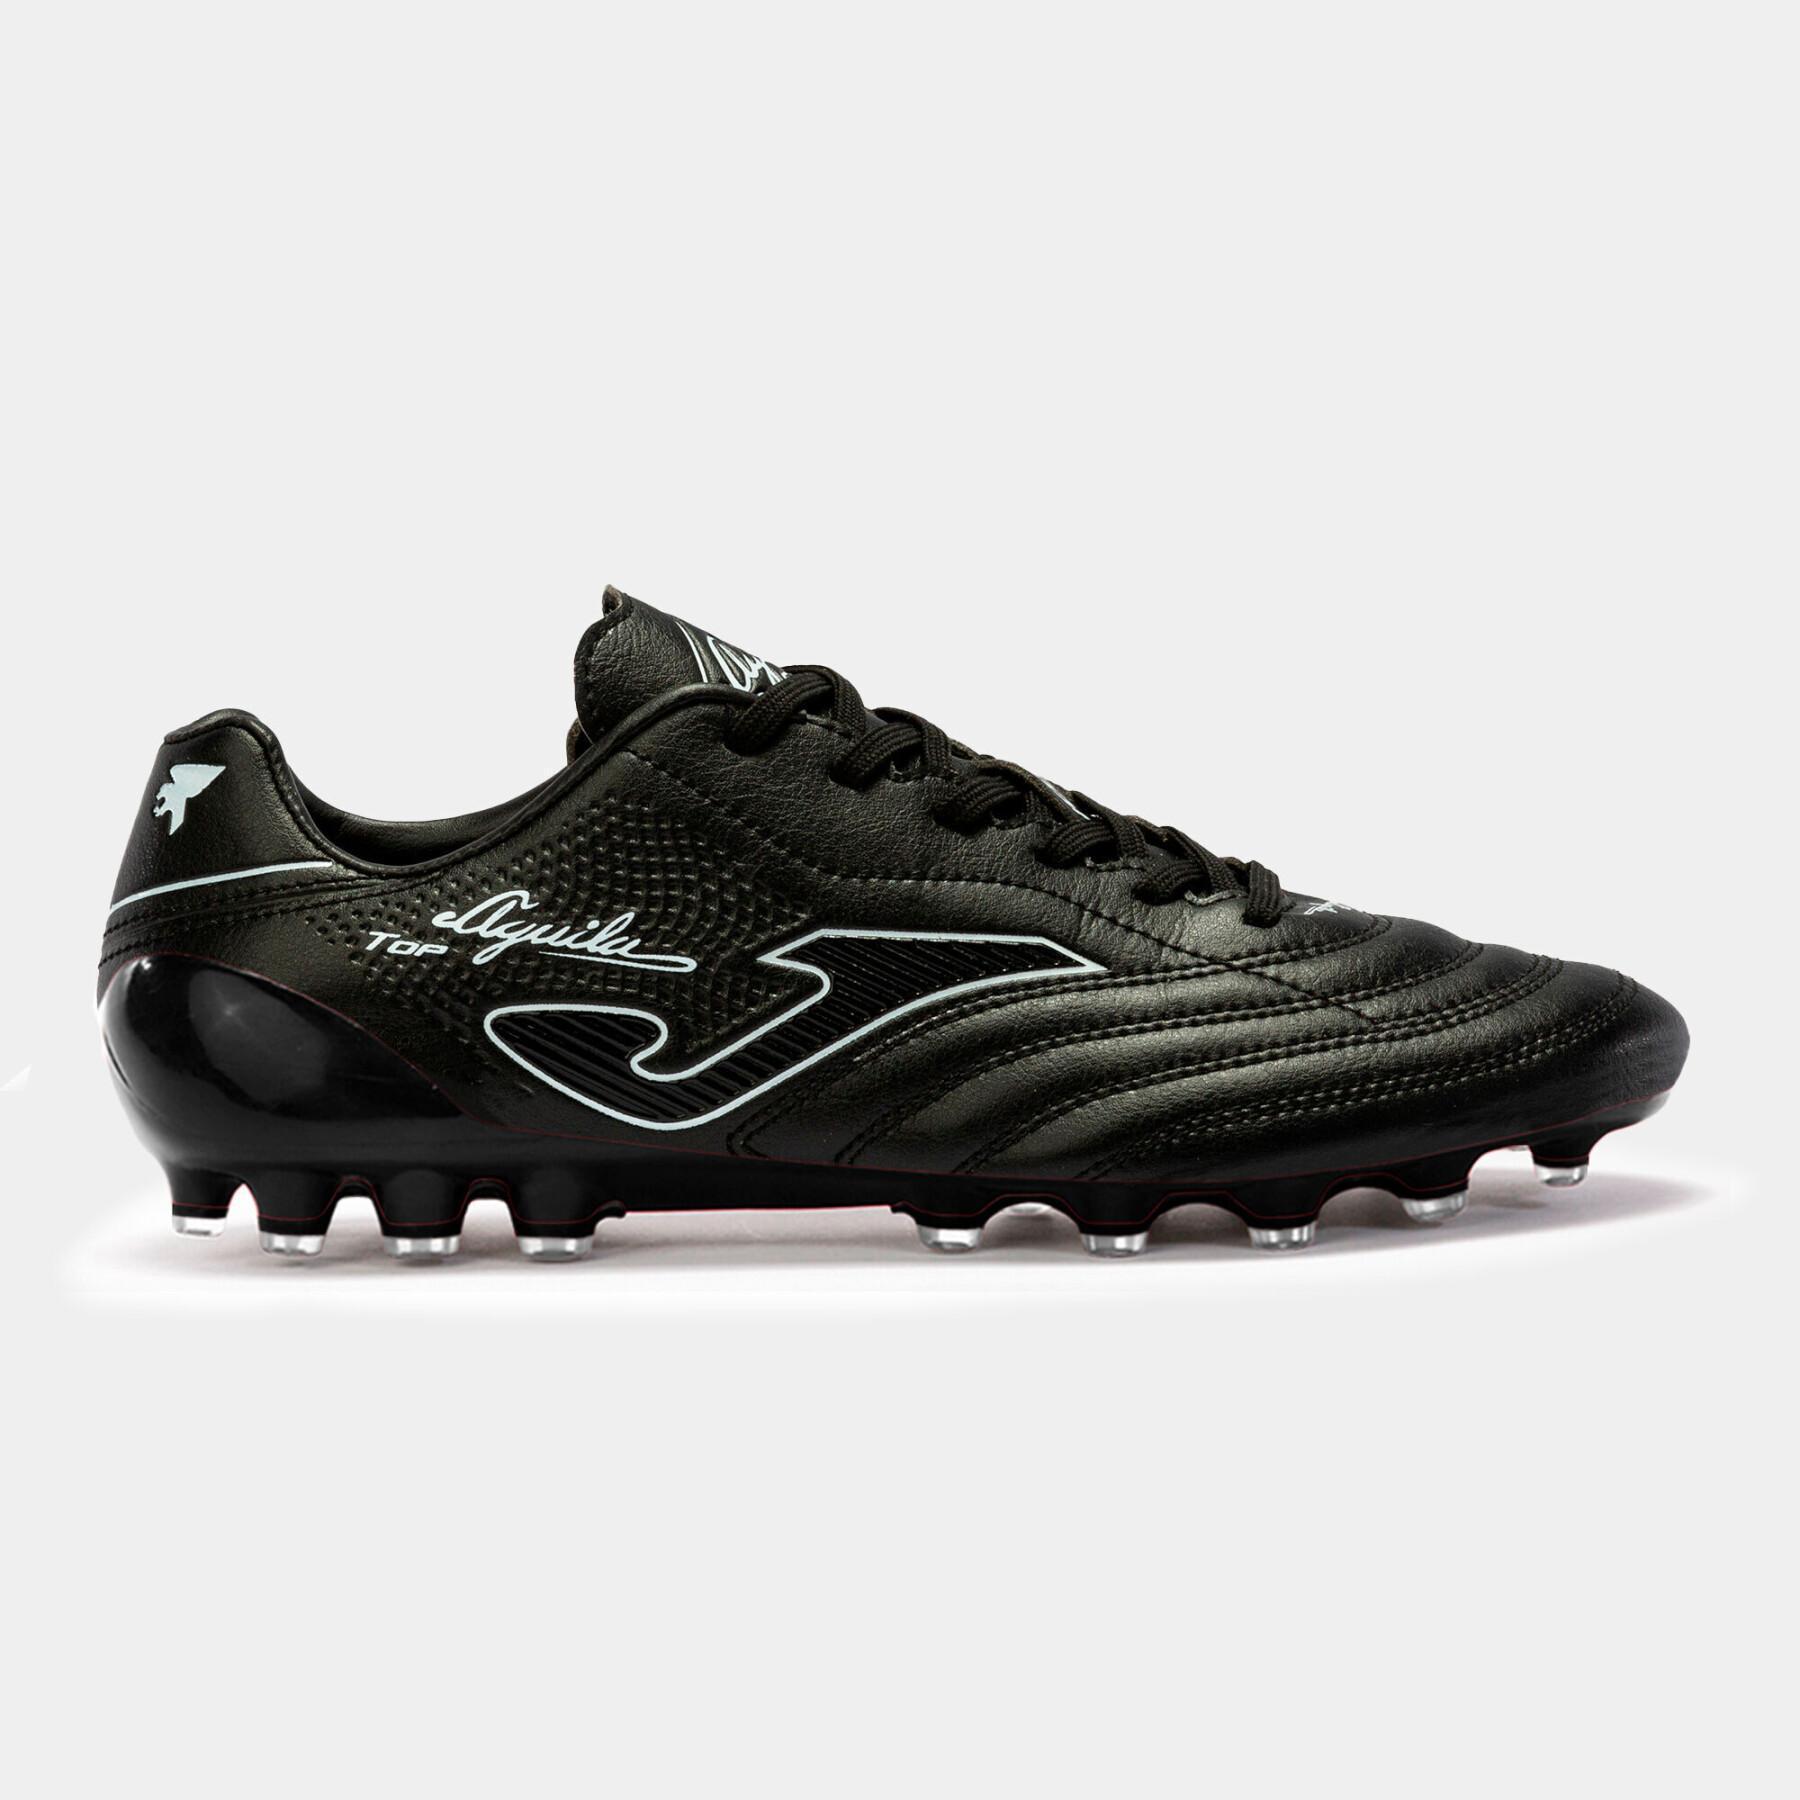 Children's artificial turf soccer boots Joma Aguila Top 2101